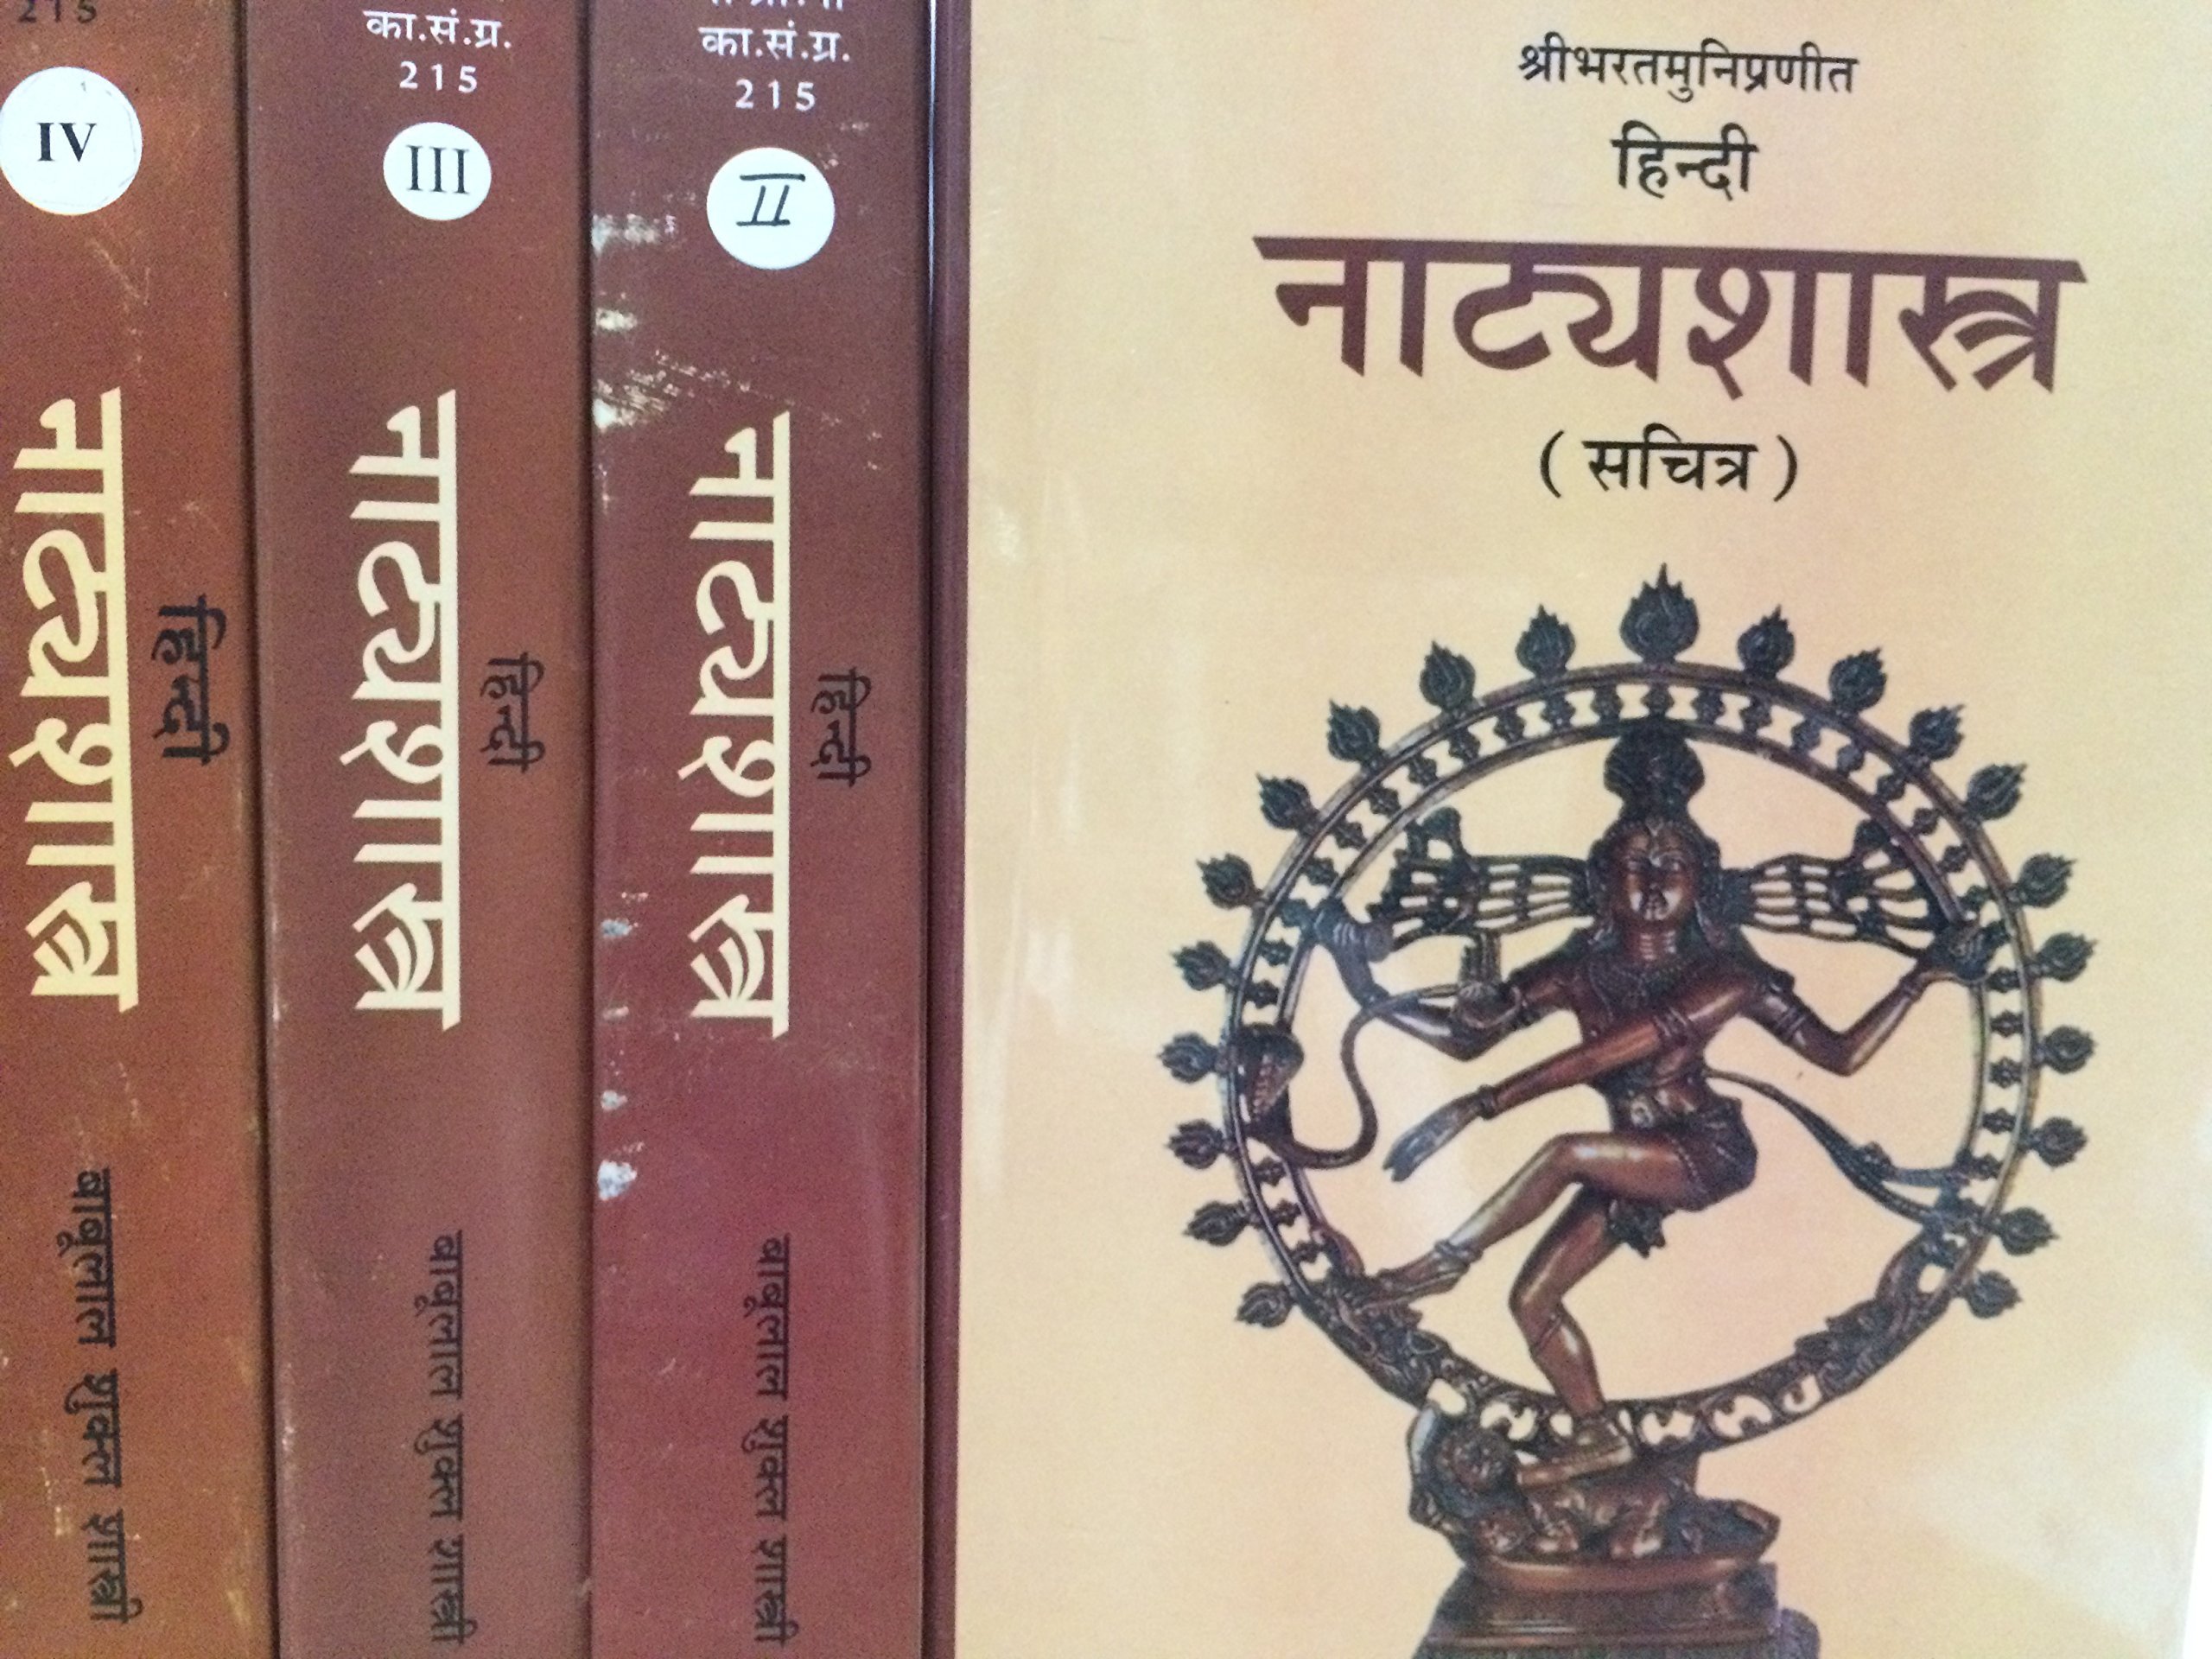 Natyashastra – One of the foundational works of Indian performing arts